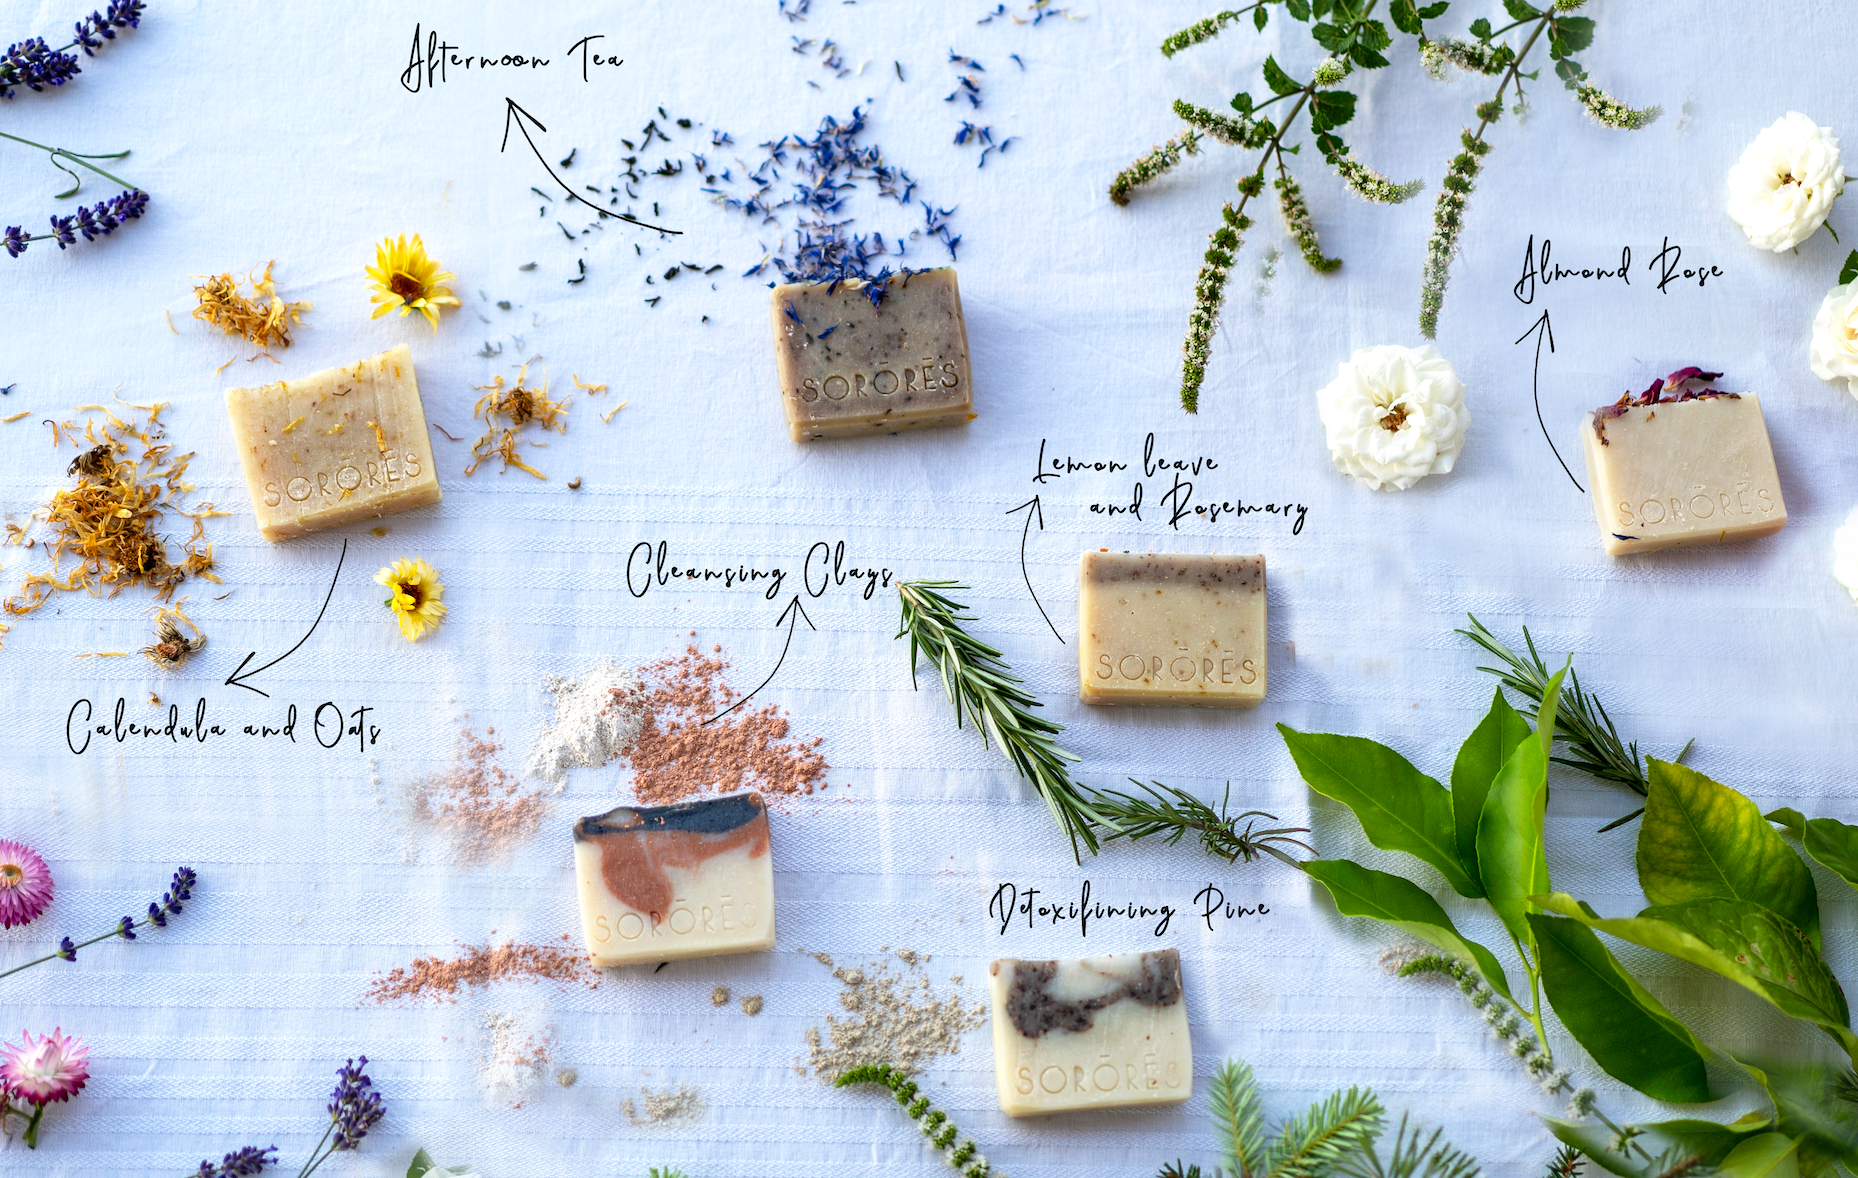 Cold Processed Soap – Sorores Aromatherapy